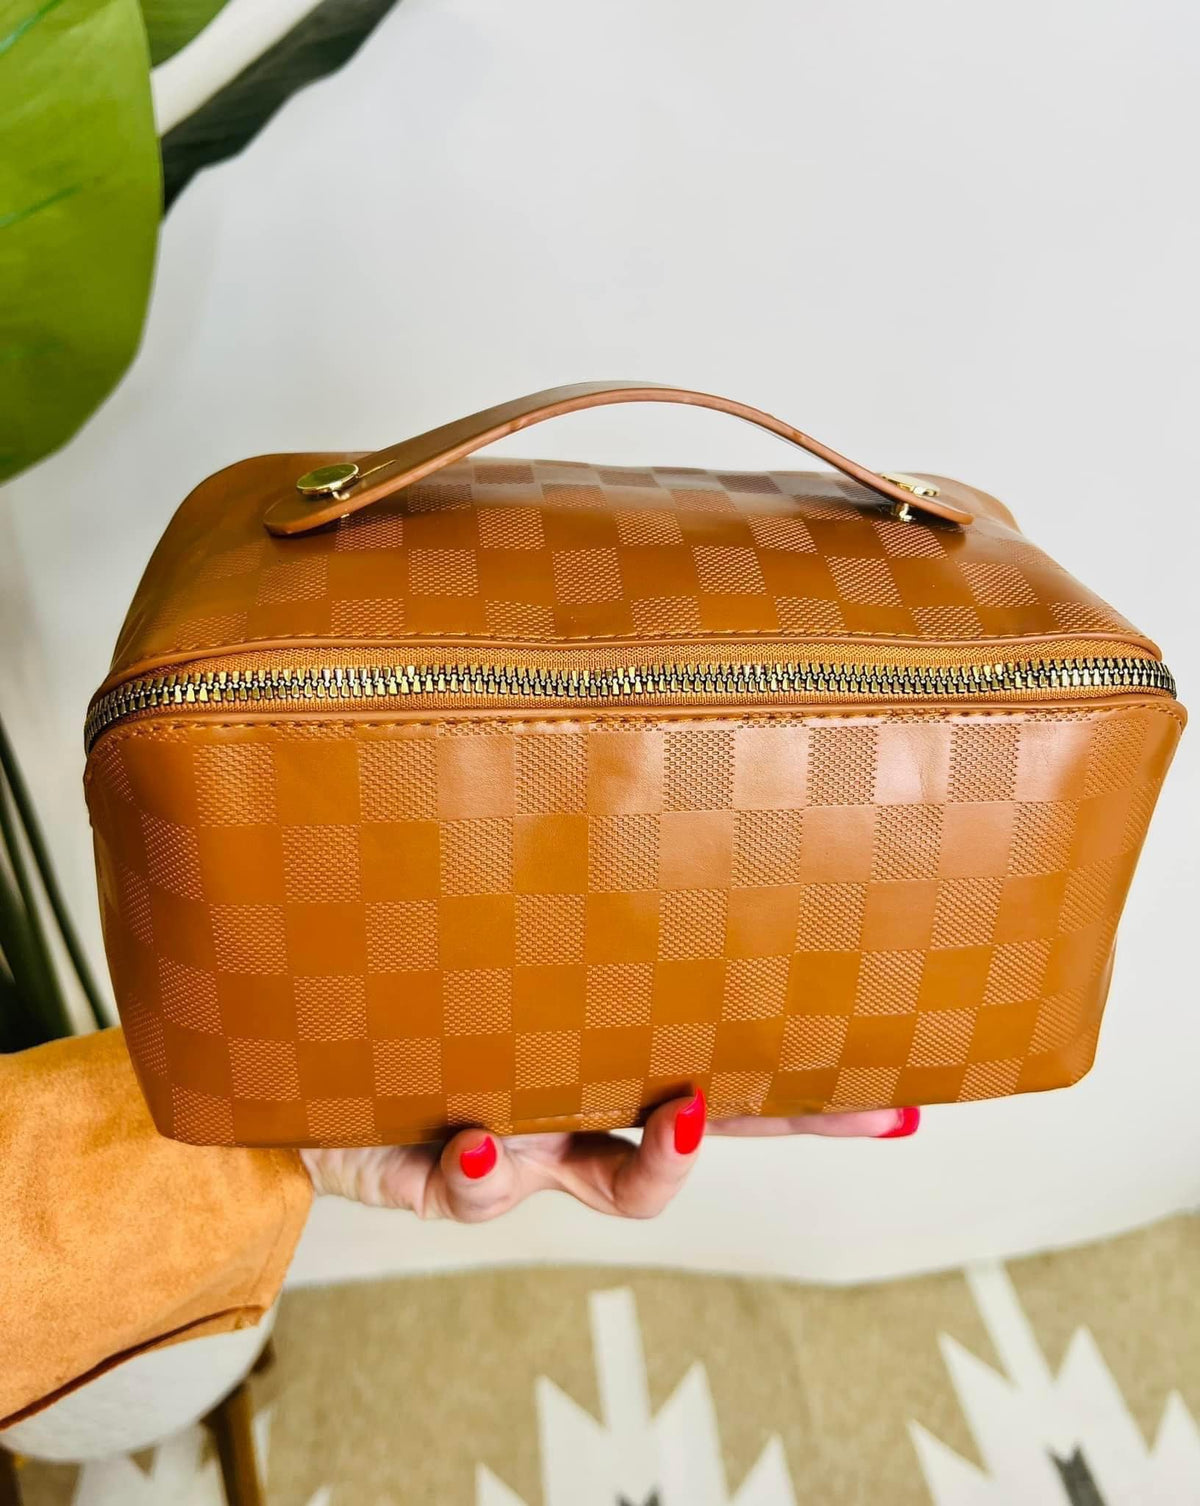 Vegan Leather Checkered Cosmetic Bag (Multiple Colors) – Lola Monroe  Boutique